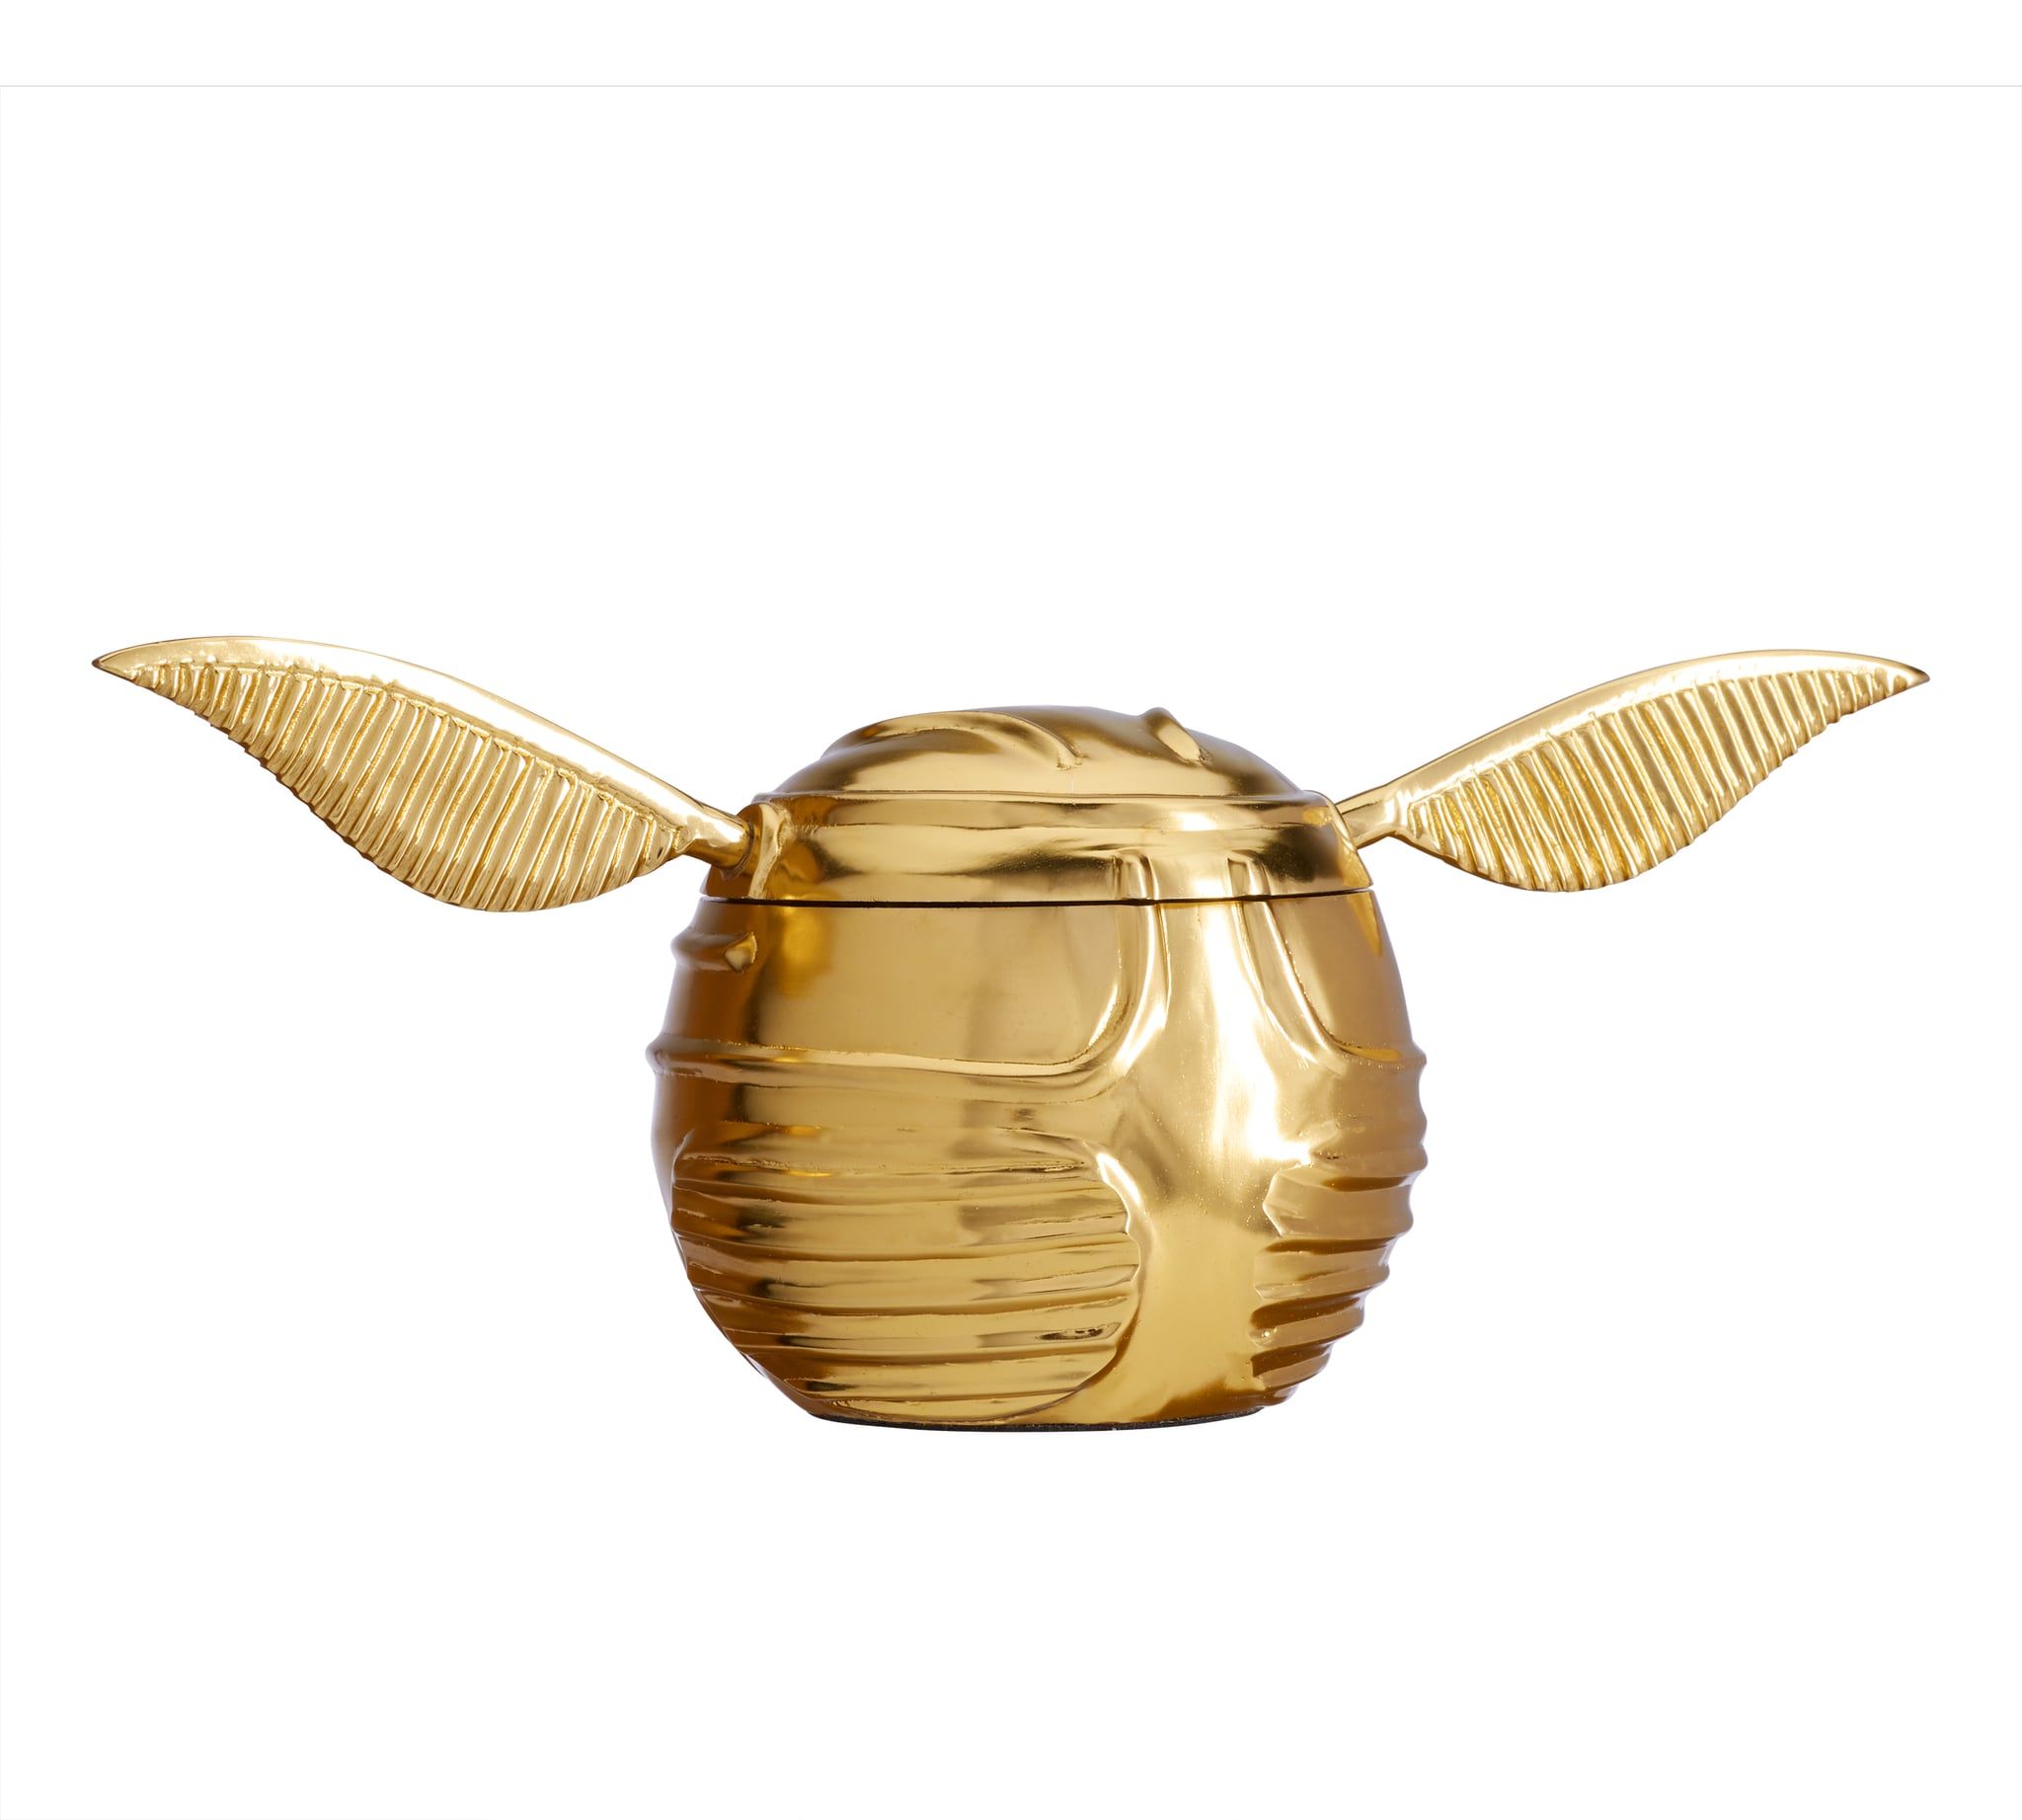 Golden Snitch Tidbit Bowl. Accio Wallet! Pottery Barn Just Released a Bunch of New Products in Its Harry Potter Collection. POPSUGAR Family Photo 4